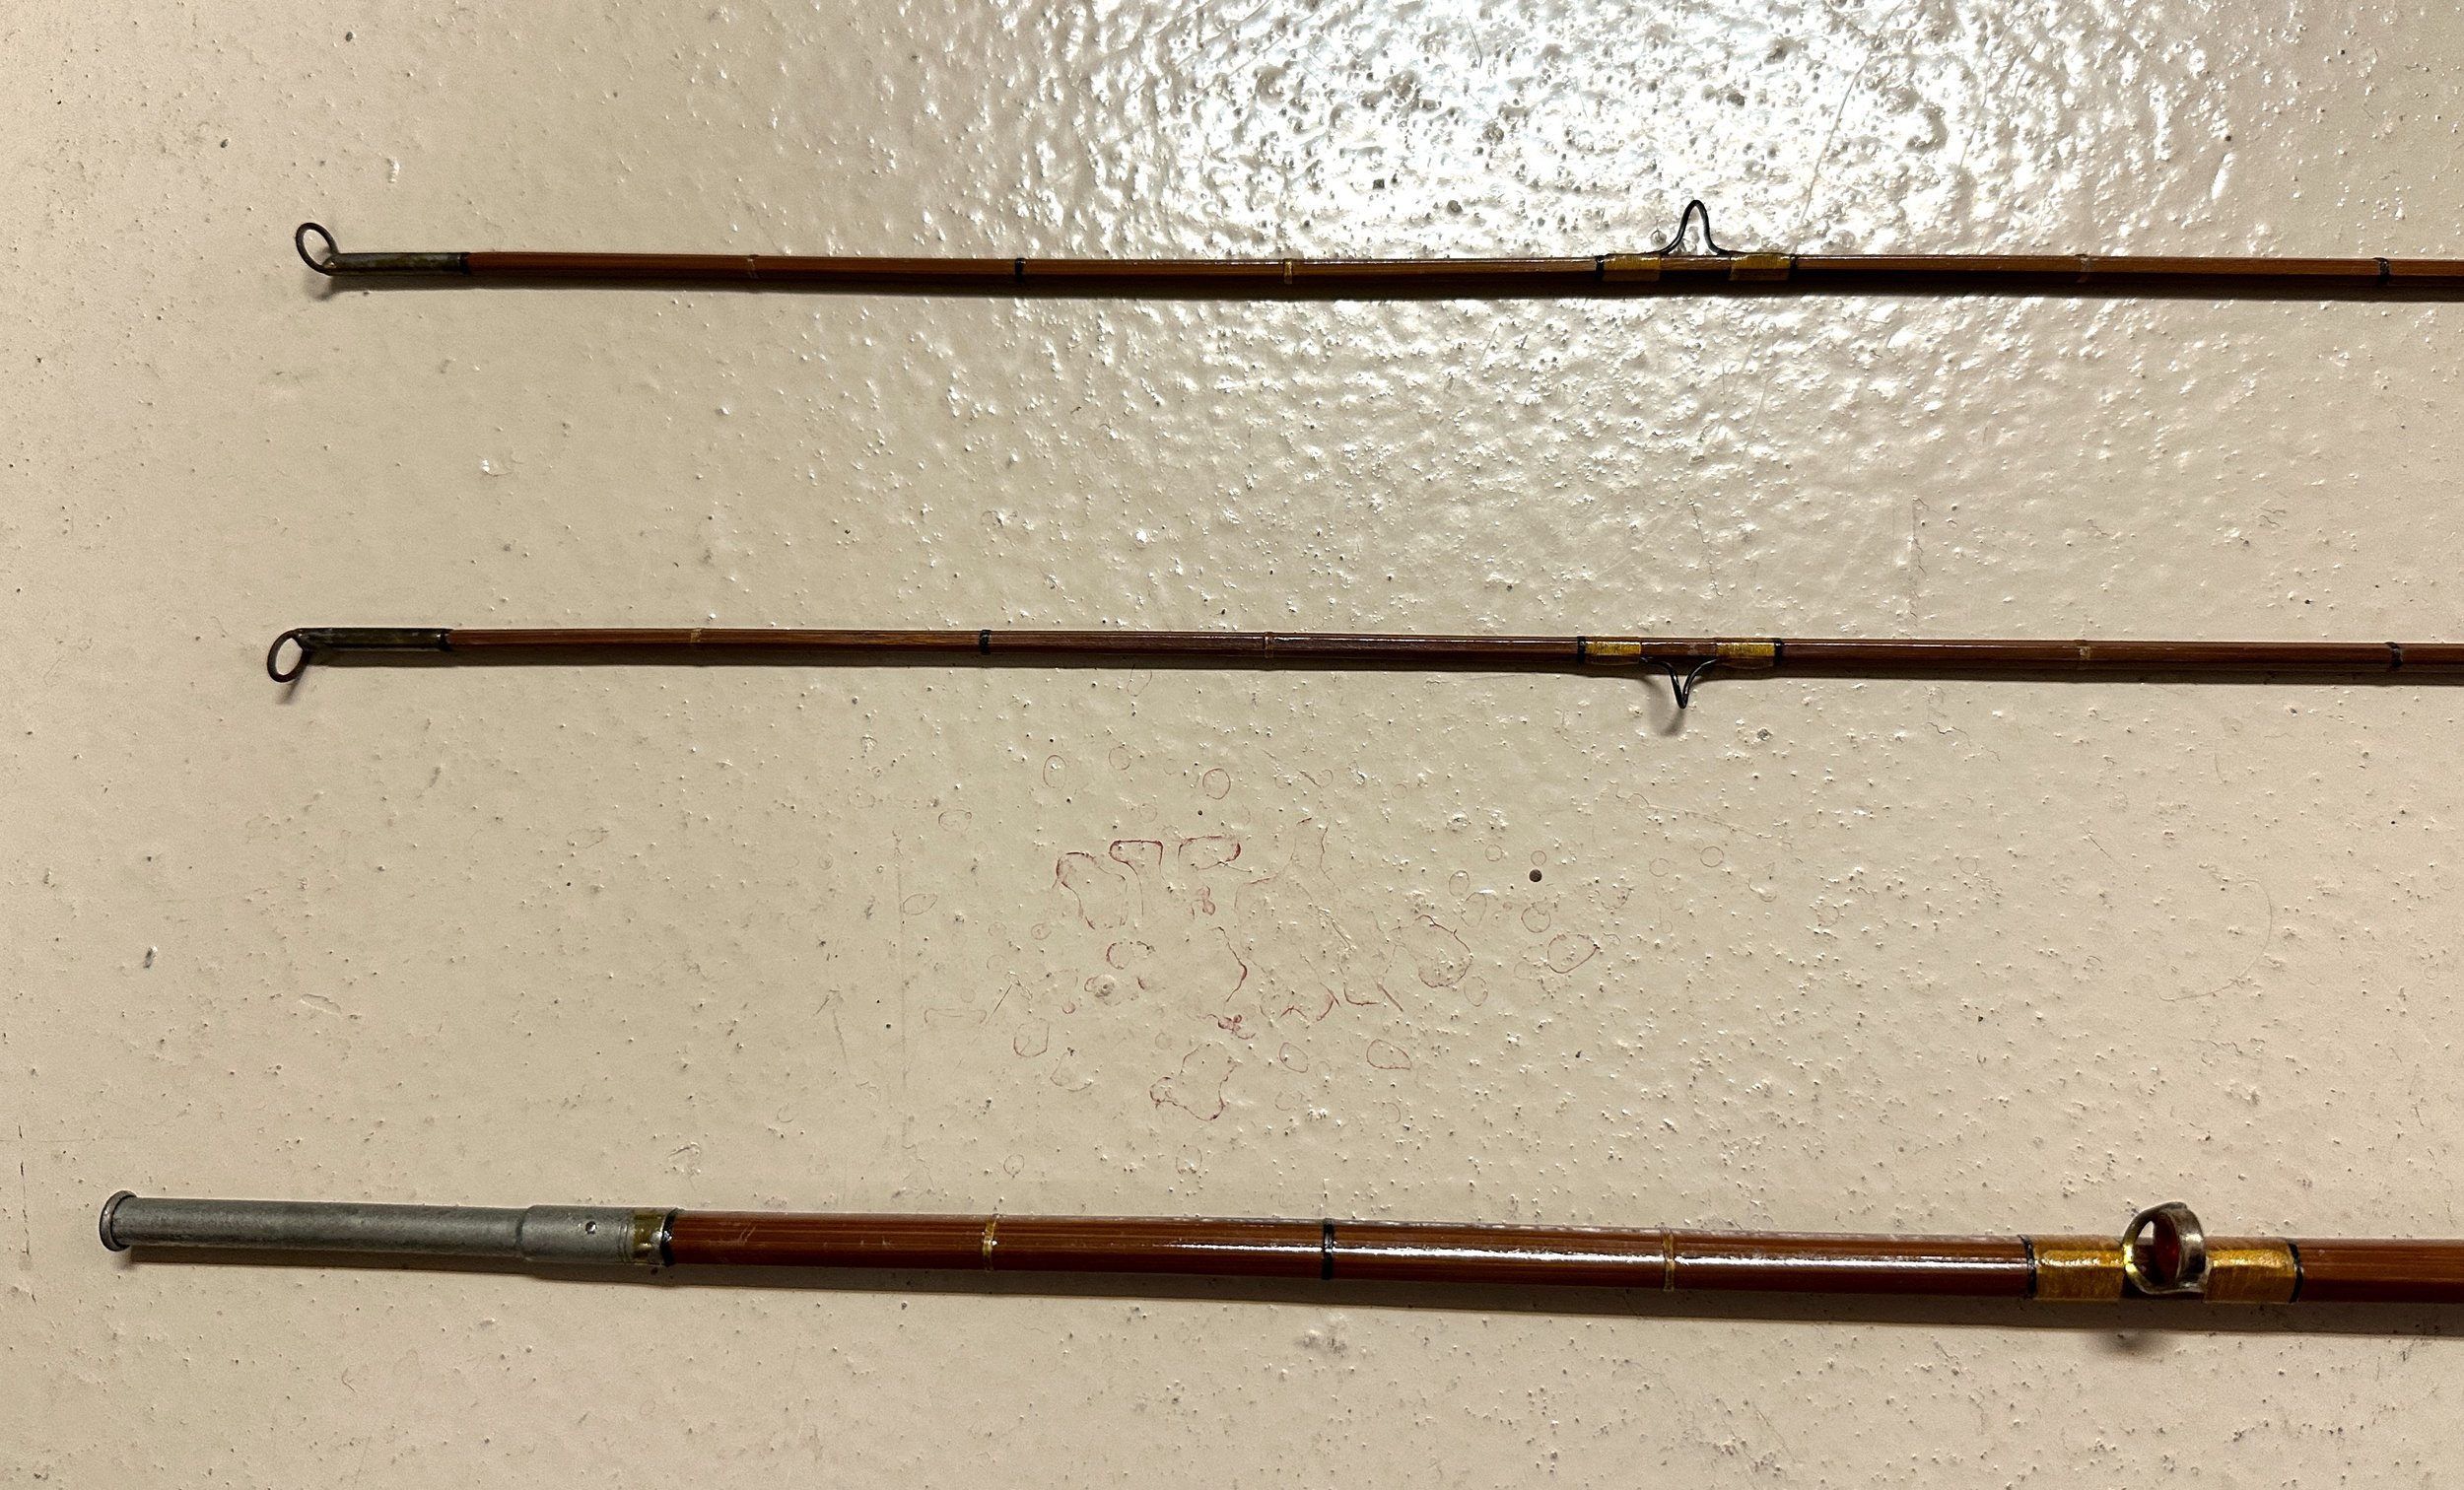 Unmarked Bamboo Fly Rod, 9', 3.2, 6 wt. — Vintage Anglers